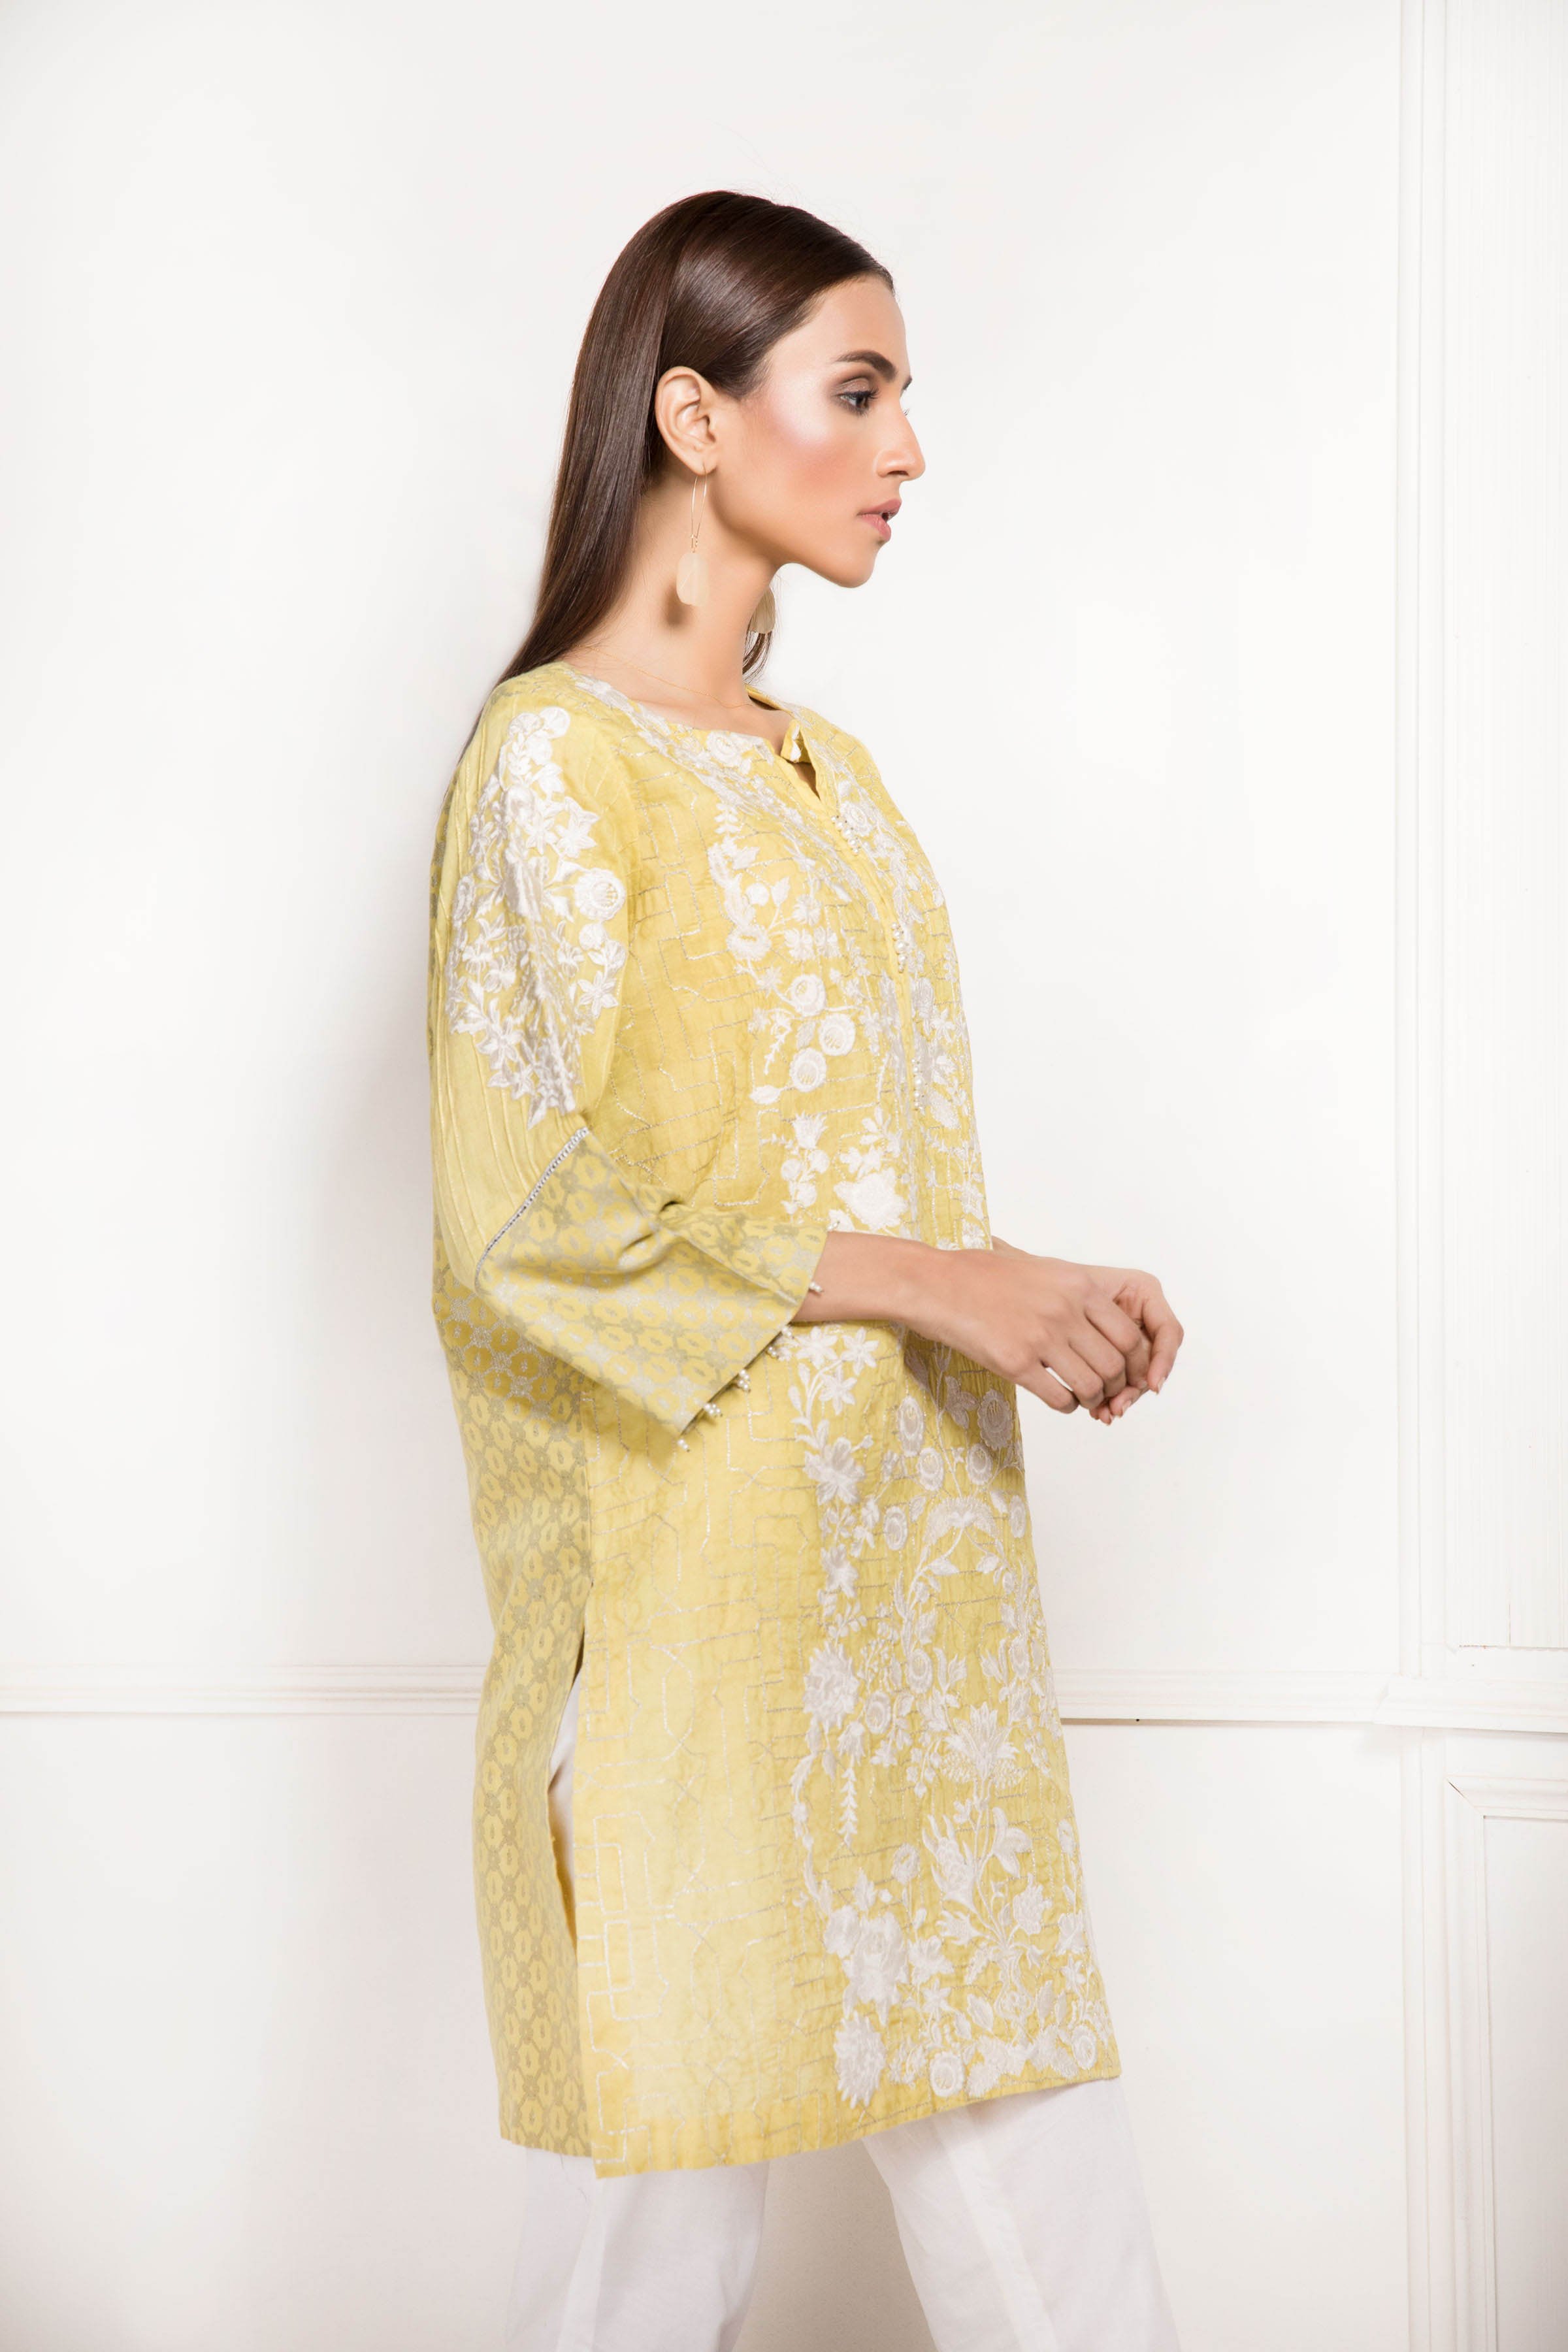 Buy this pretty yellow colored Pakistani cotton suit by Sapphire.Buy this pretty yellow colored Pakistani cotton suit by Sapphire.